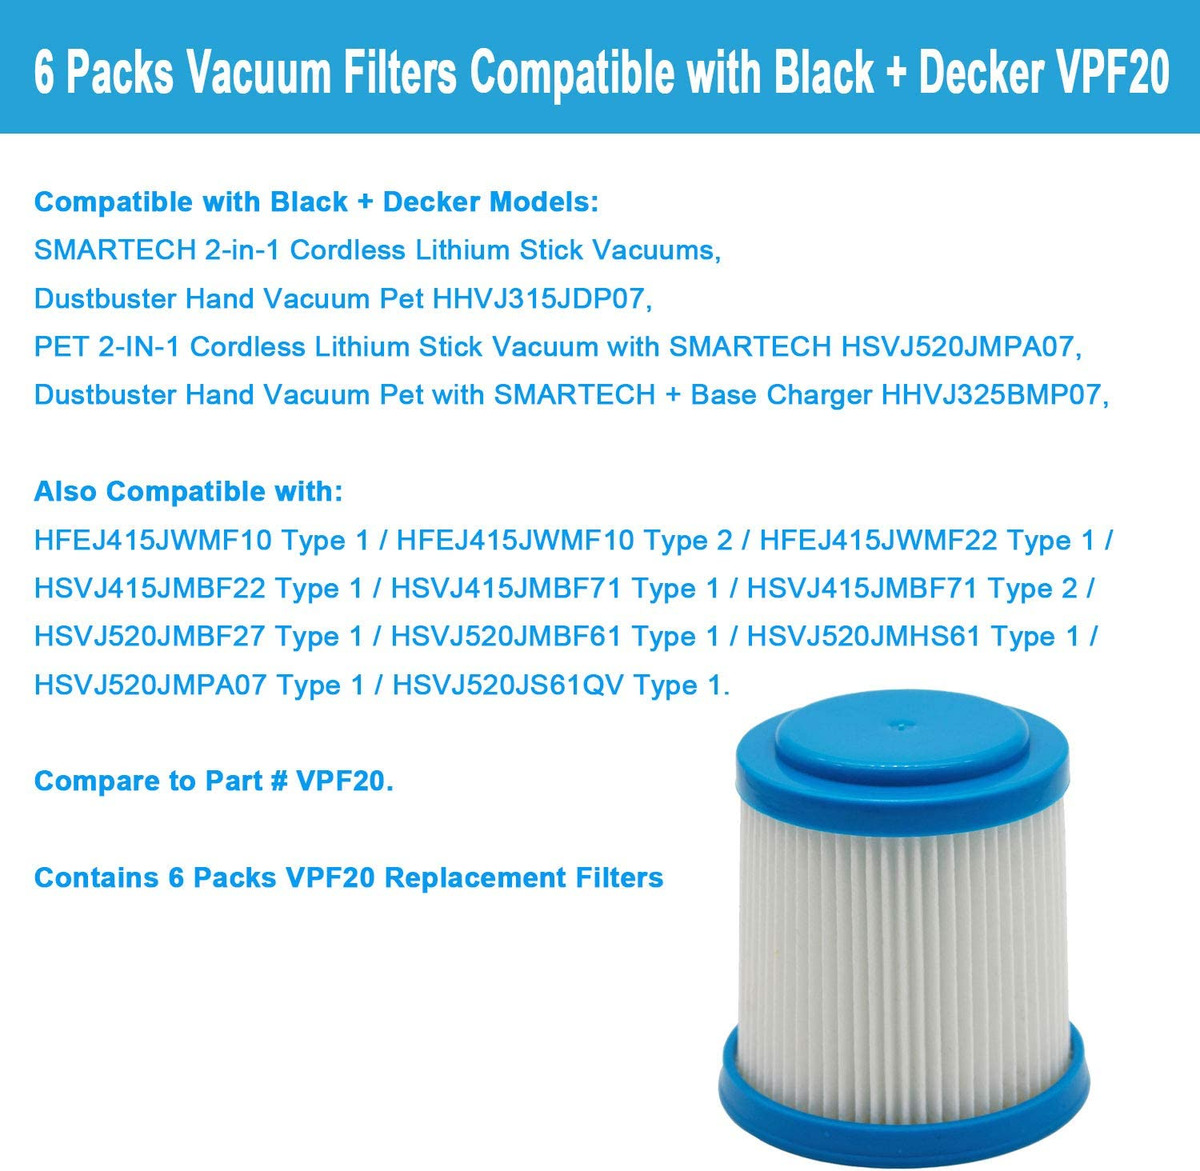 Lemige 6 Packs Vpf20 Replacement Filters for Black and Decker Smartech Pet Lithium 2-in-1 Cordless Stick Vacuum